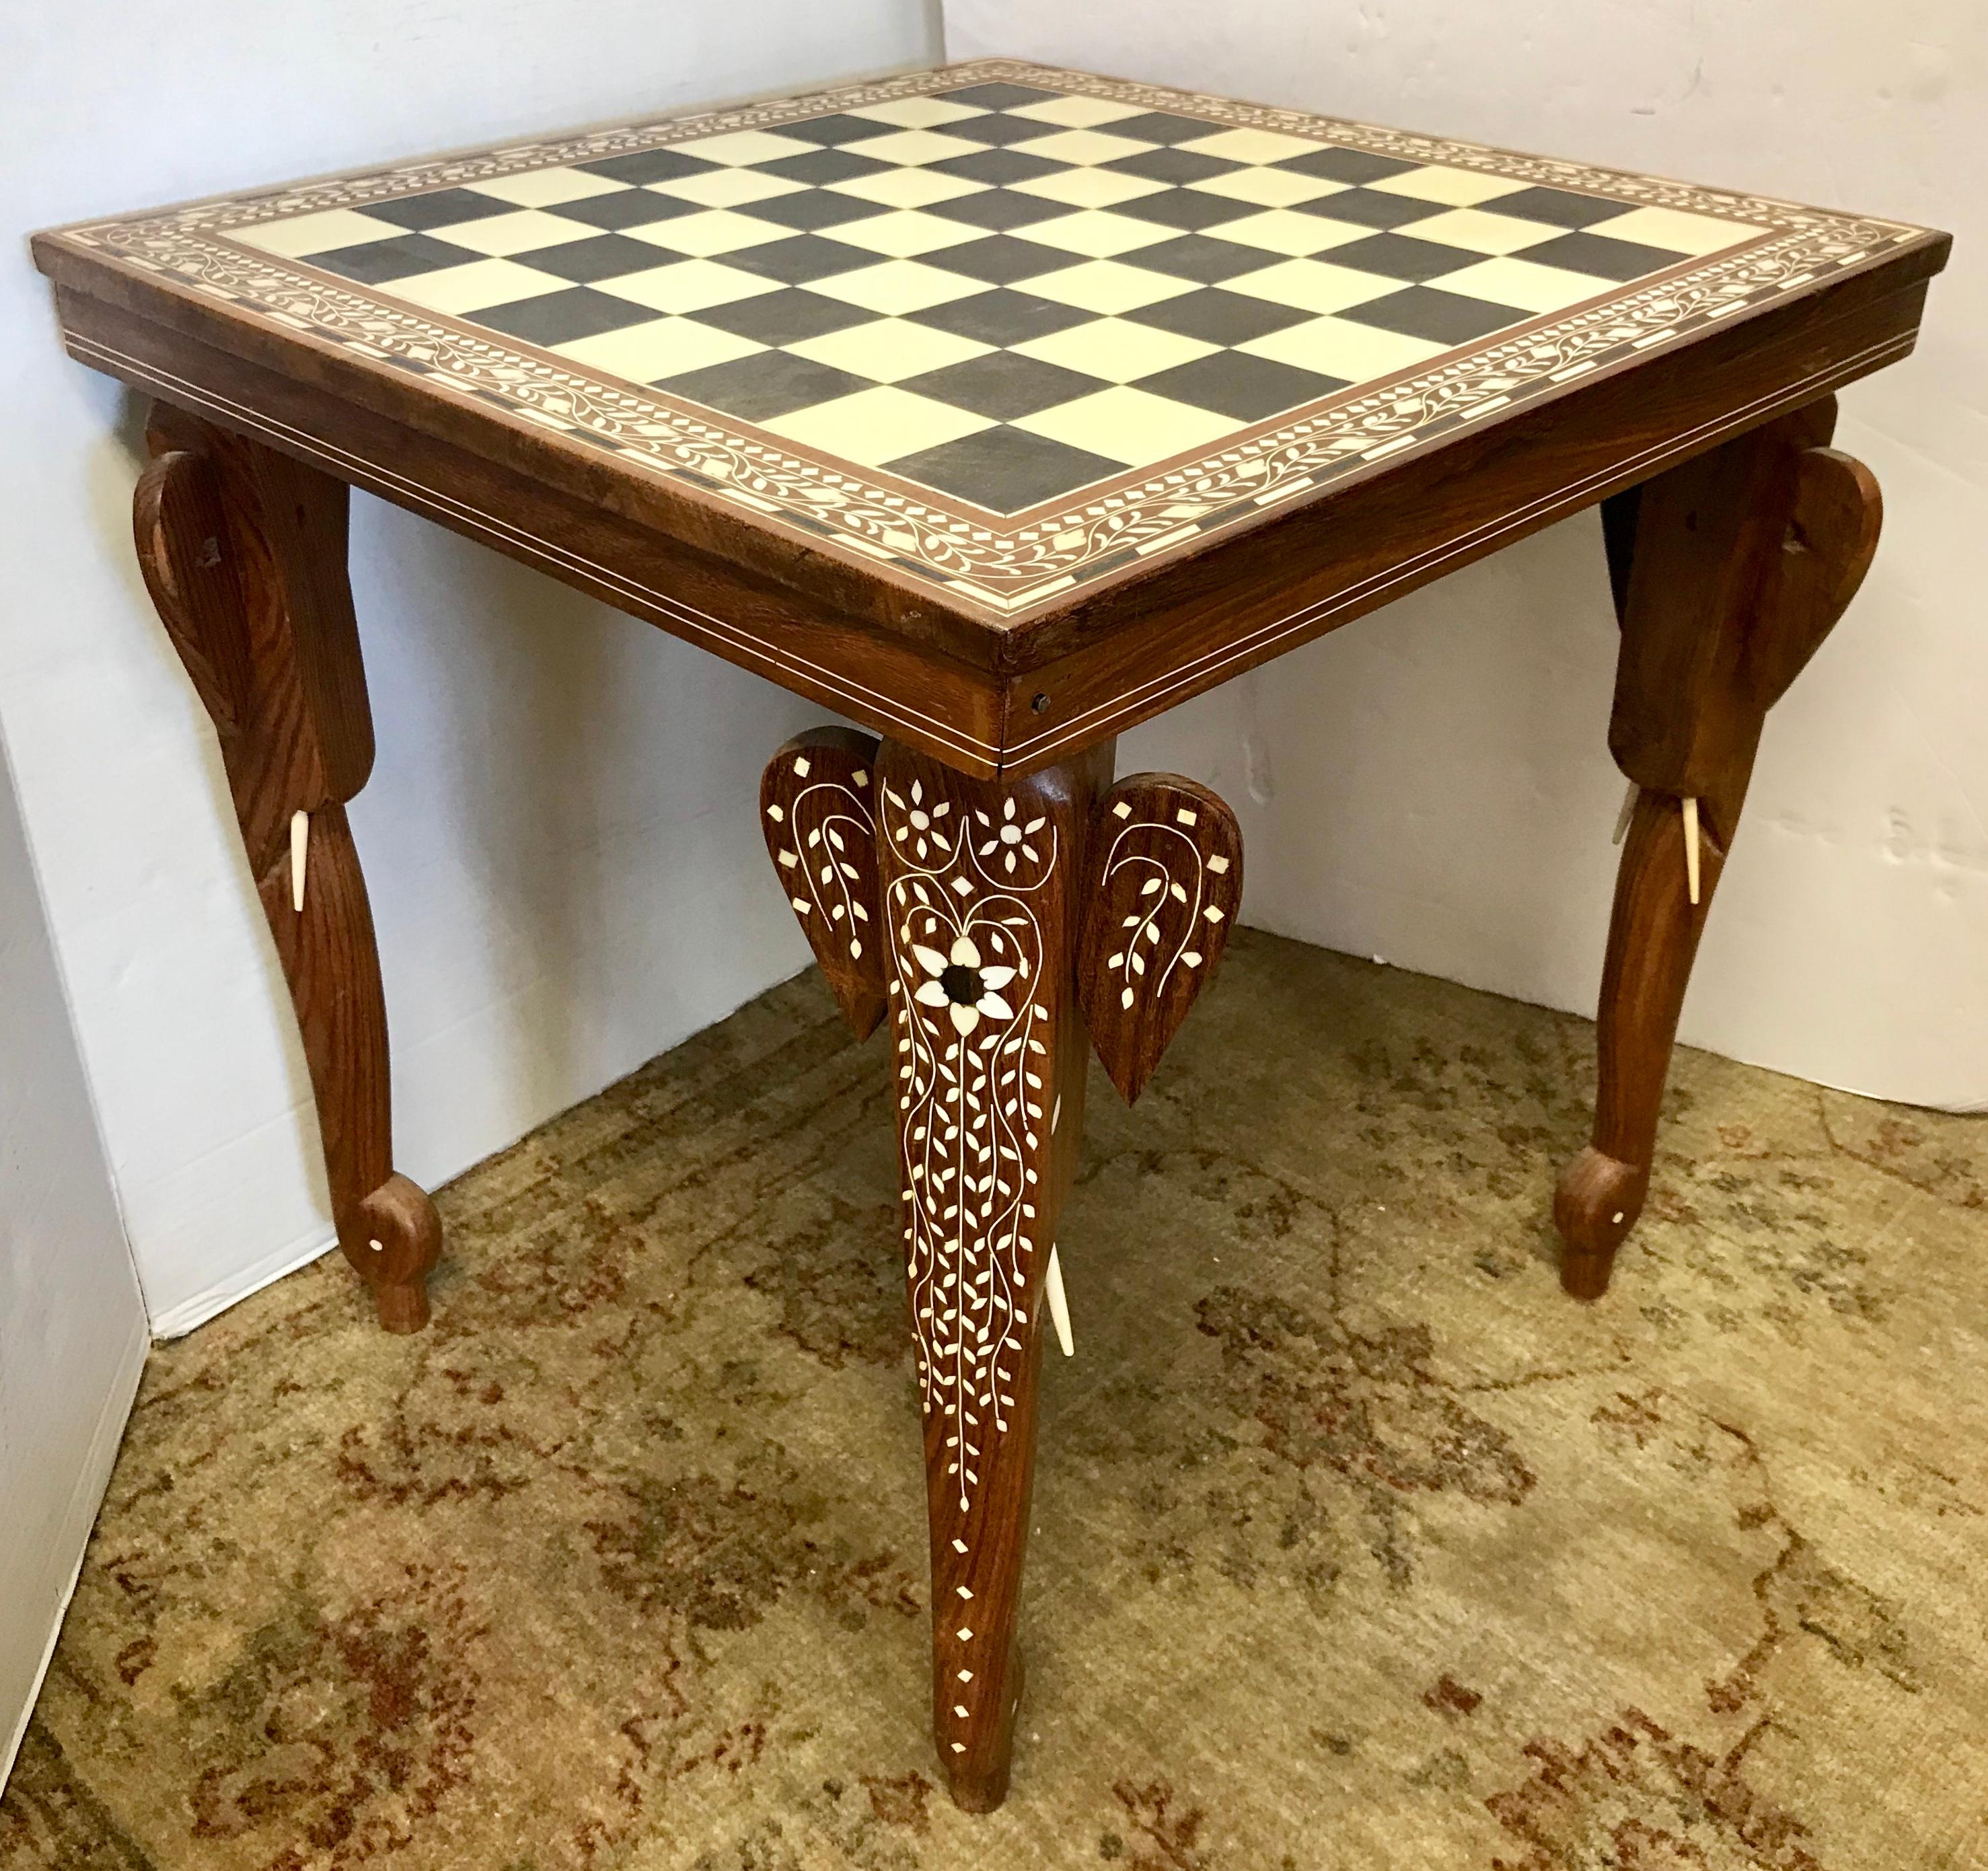 Carved Mother of Pearl Chess Game Table Smaller in Scale with Carved Chess Set 2